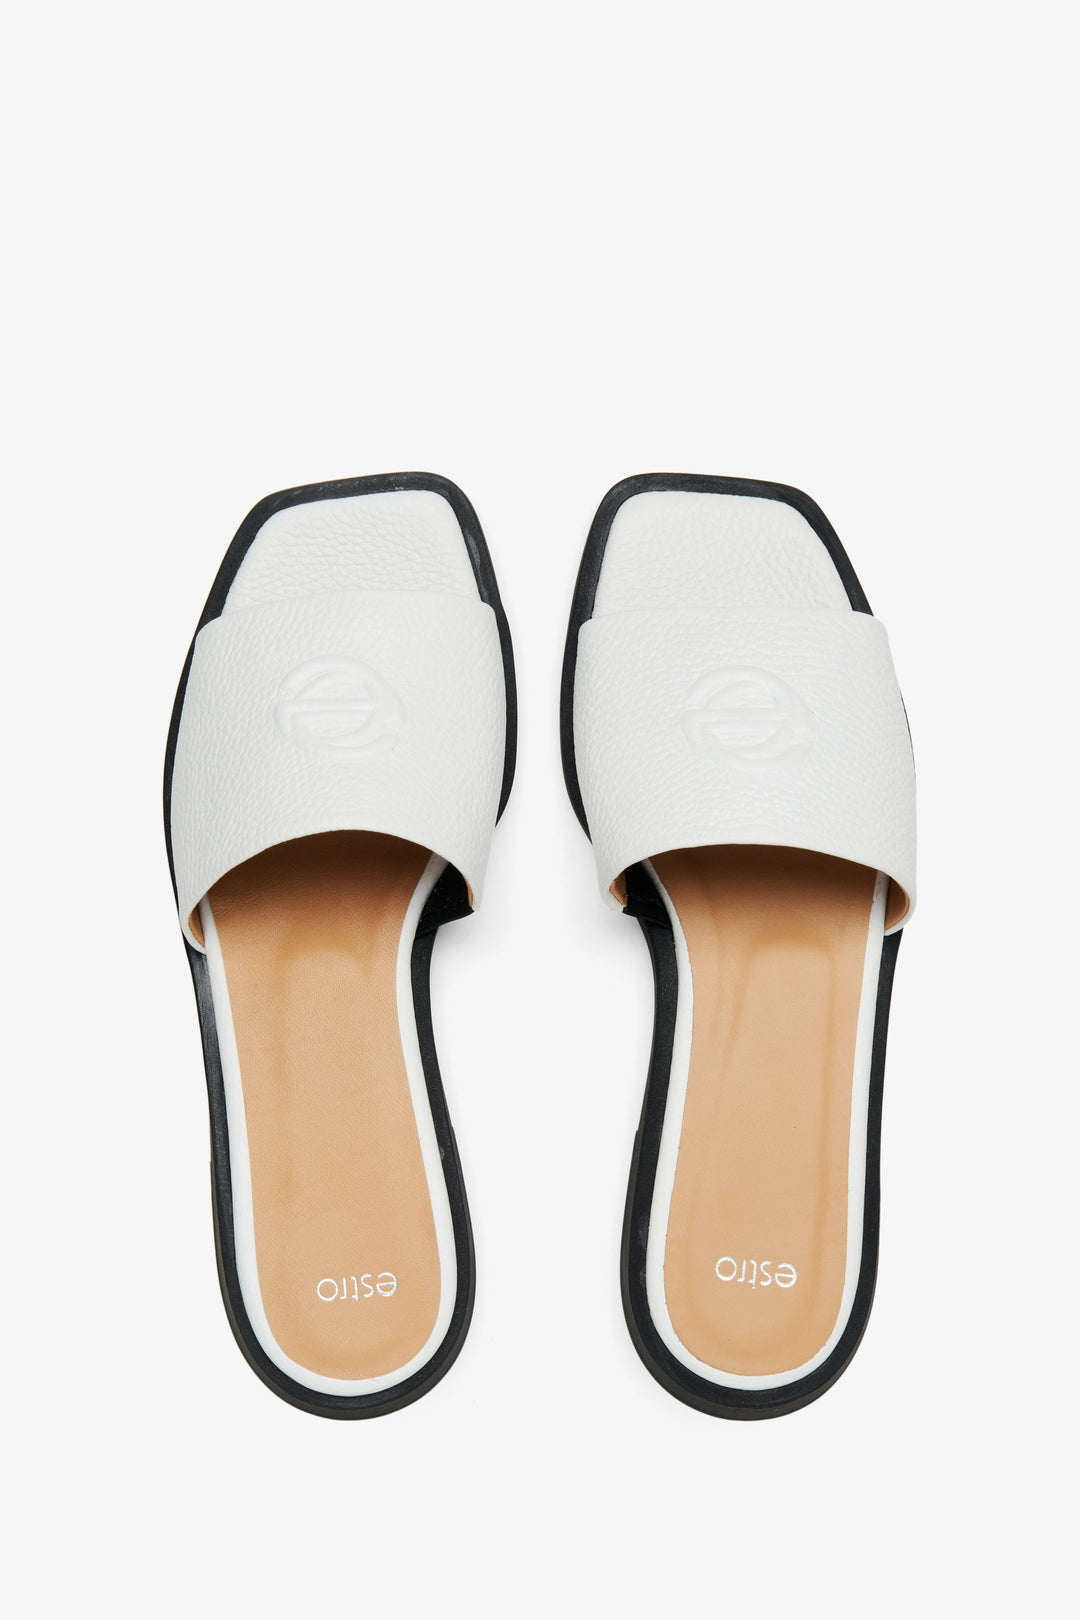 Women's white leather  flip-flops by Estro - top view presentation of the model.